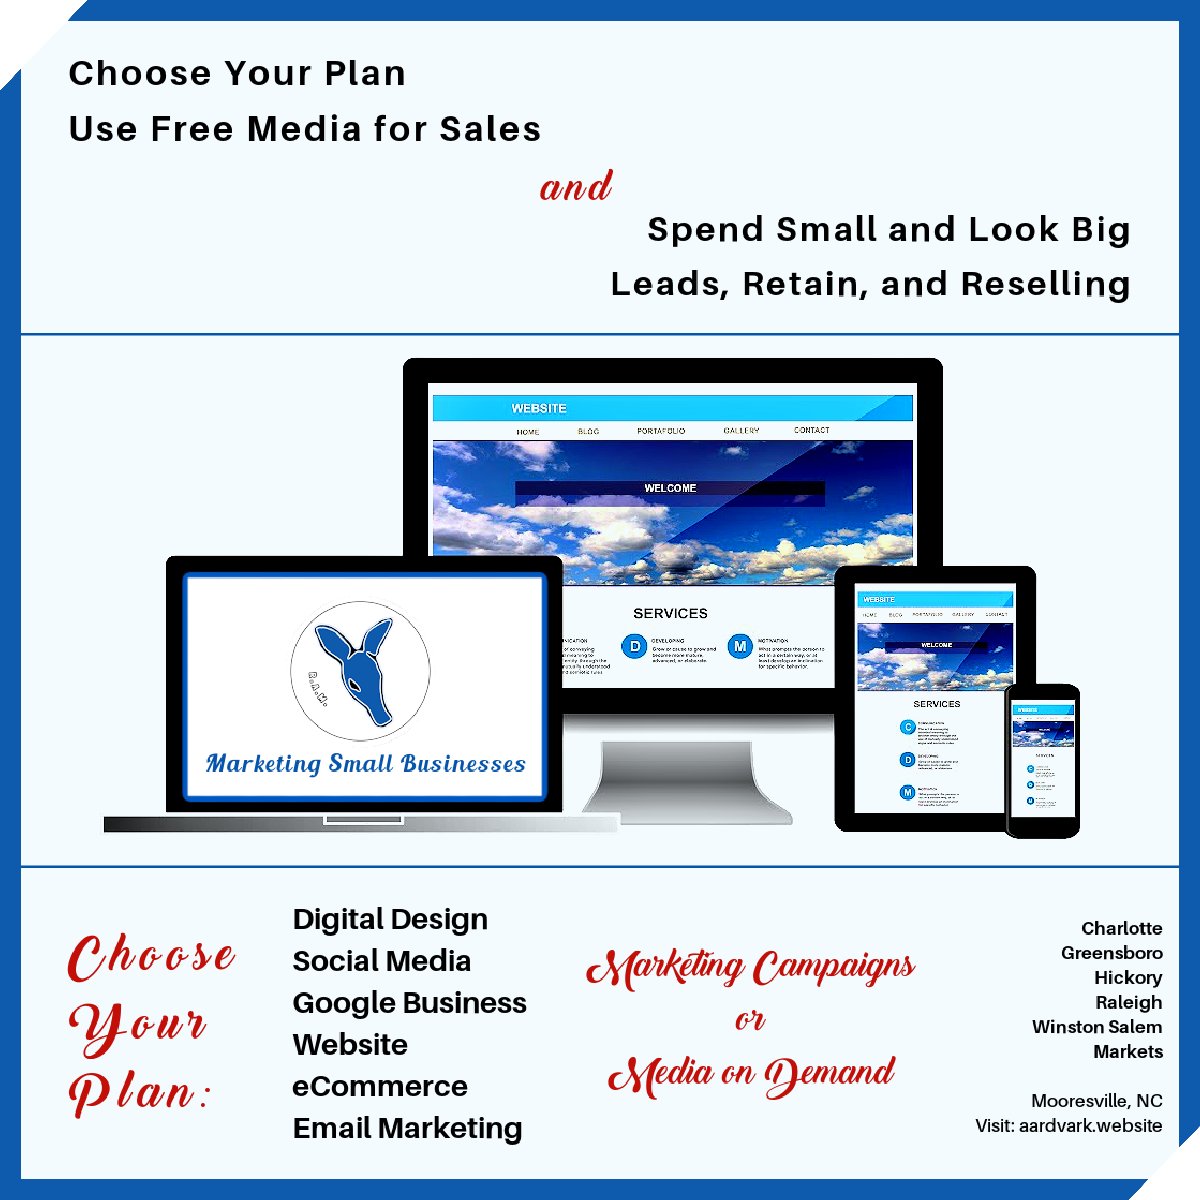 Spend Small Look Big. Digital Marketing for small businesses with website, social media, email marketing. Choose your plan & set your budget. #digitaldesign #lakenorman #charlotte #hickory #raleigh #spa #handyman #furniture  #doctor #aesthetics